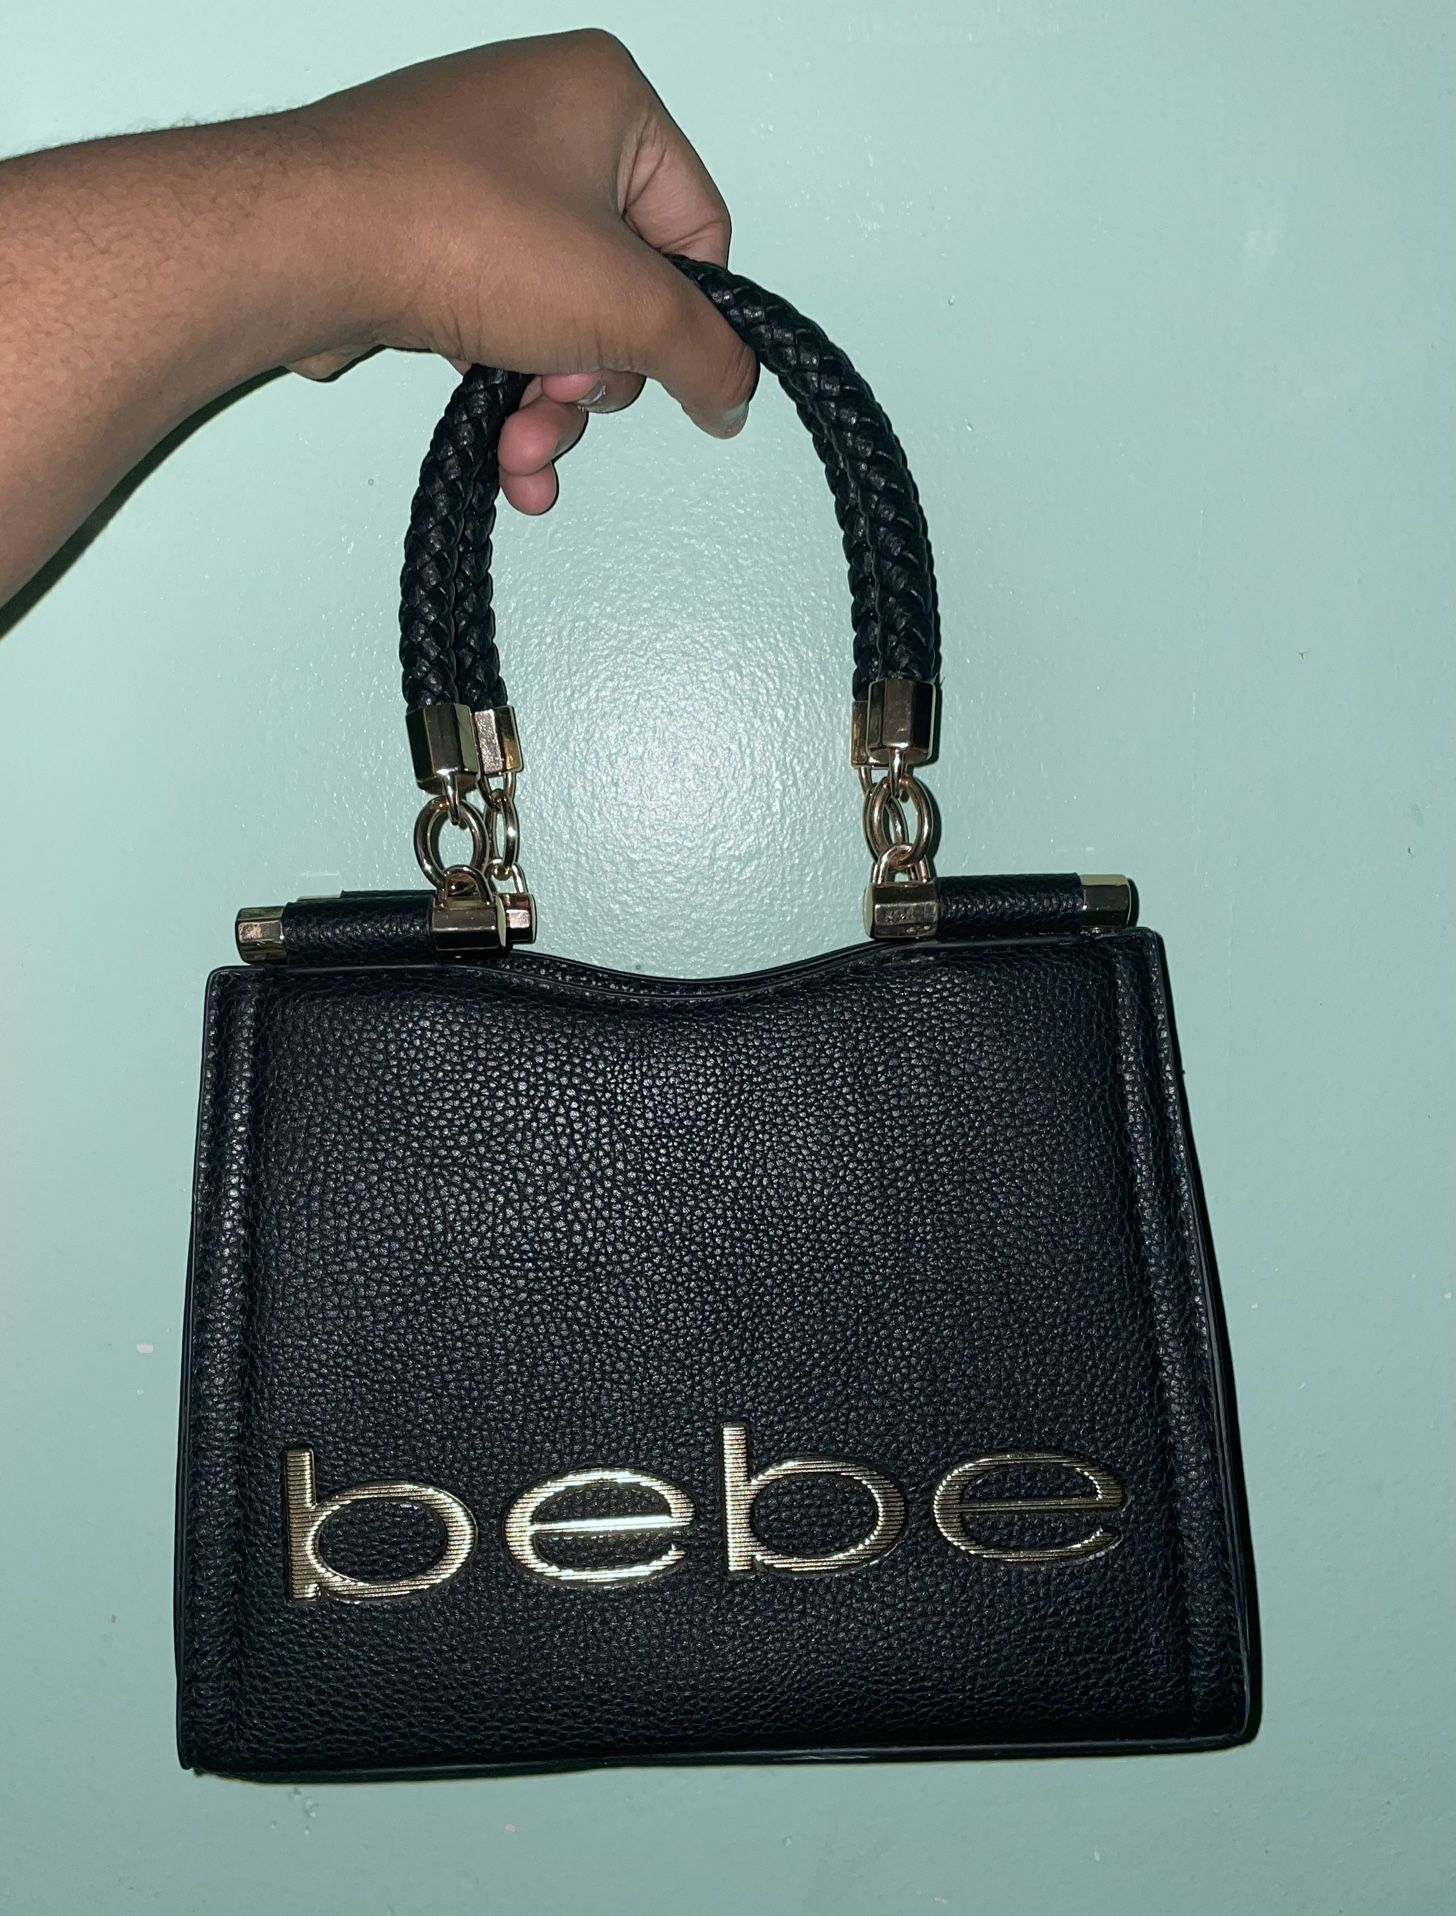 Bebe Purse - Black And gold